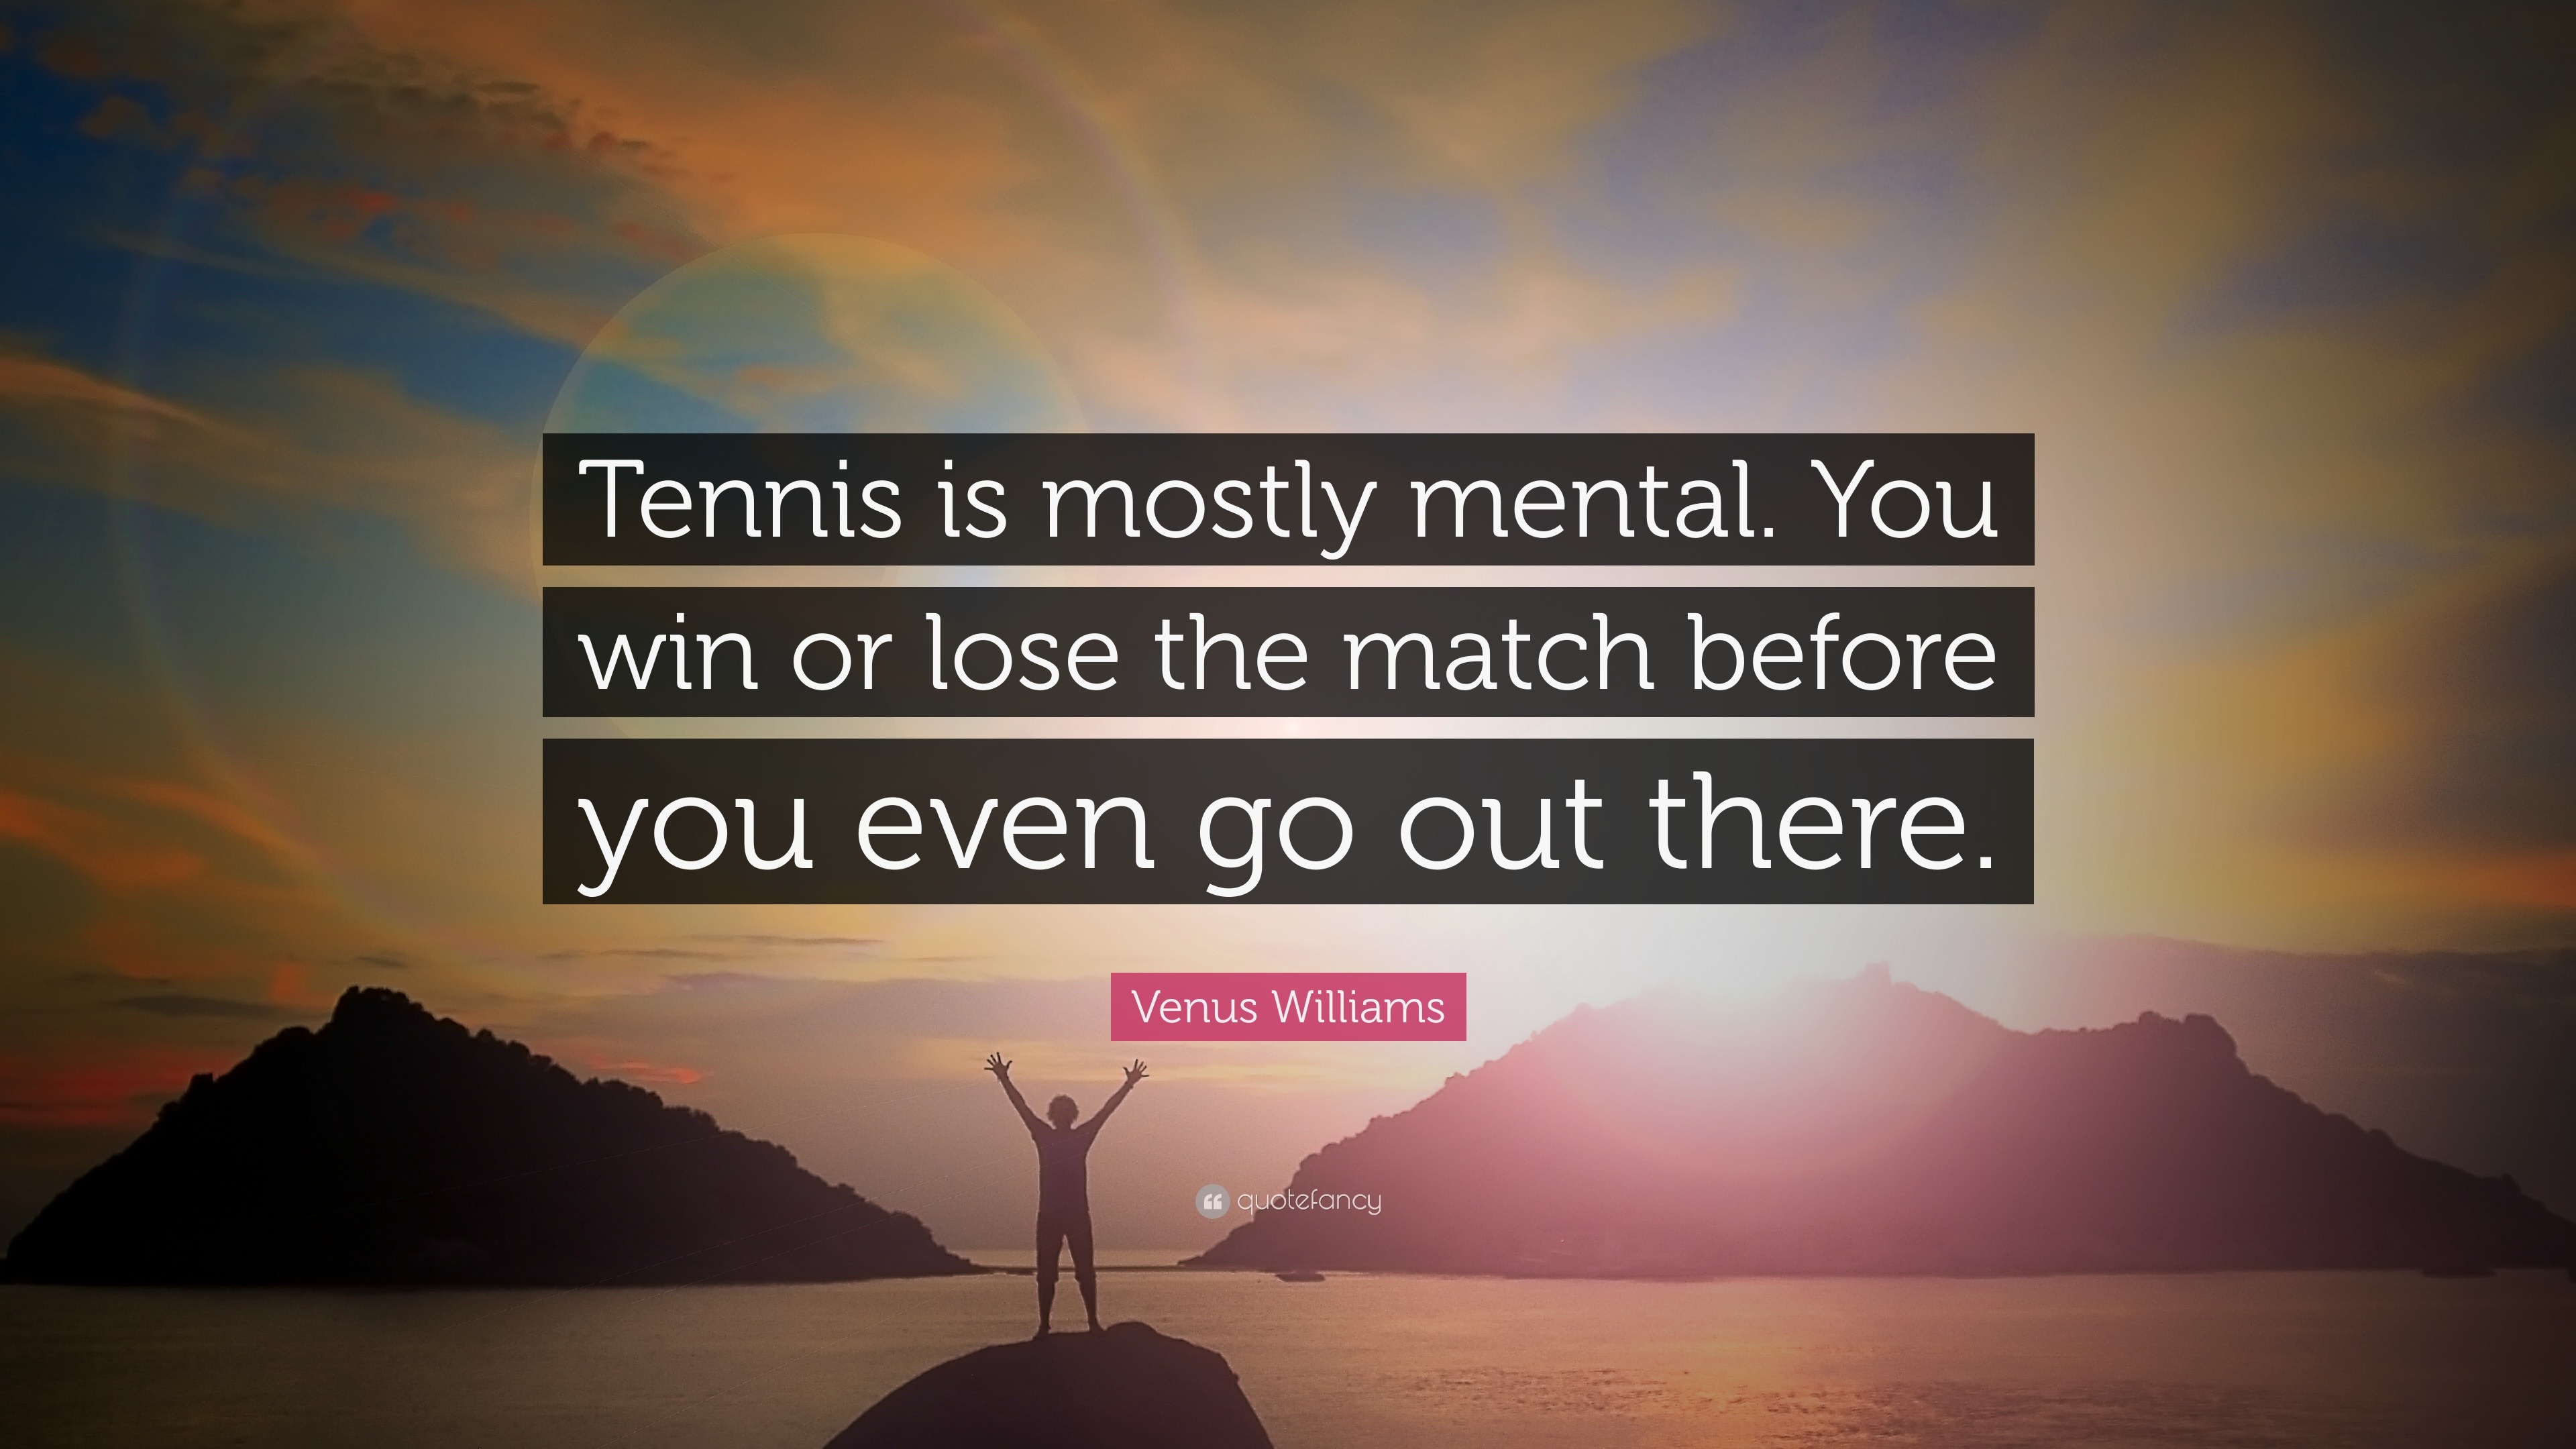 Venus Williams Quote: “Tennis is mostly mental. You win or lose the match before you ...3840 x 2160